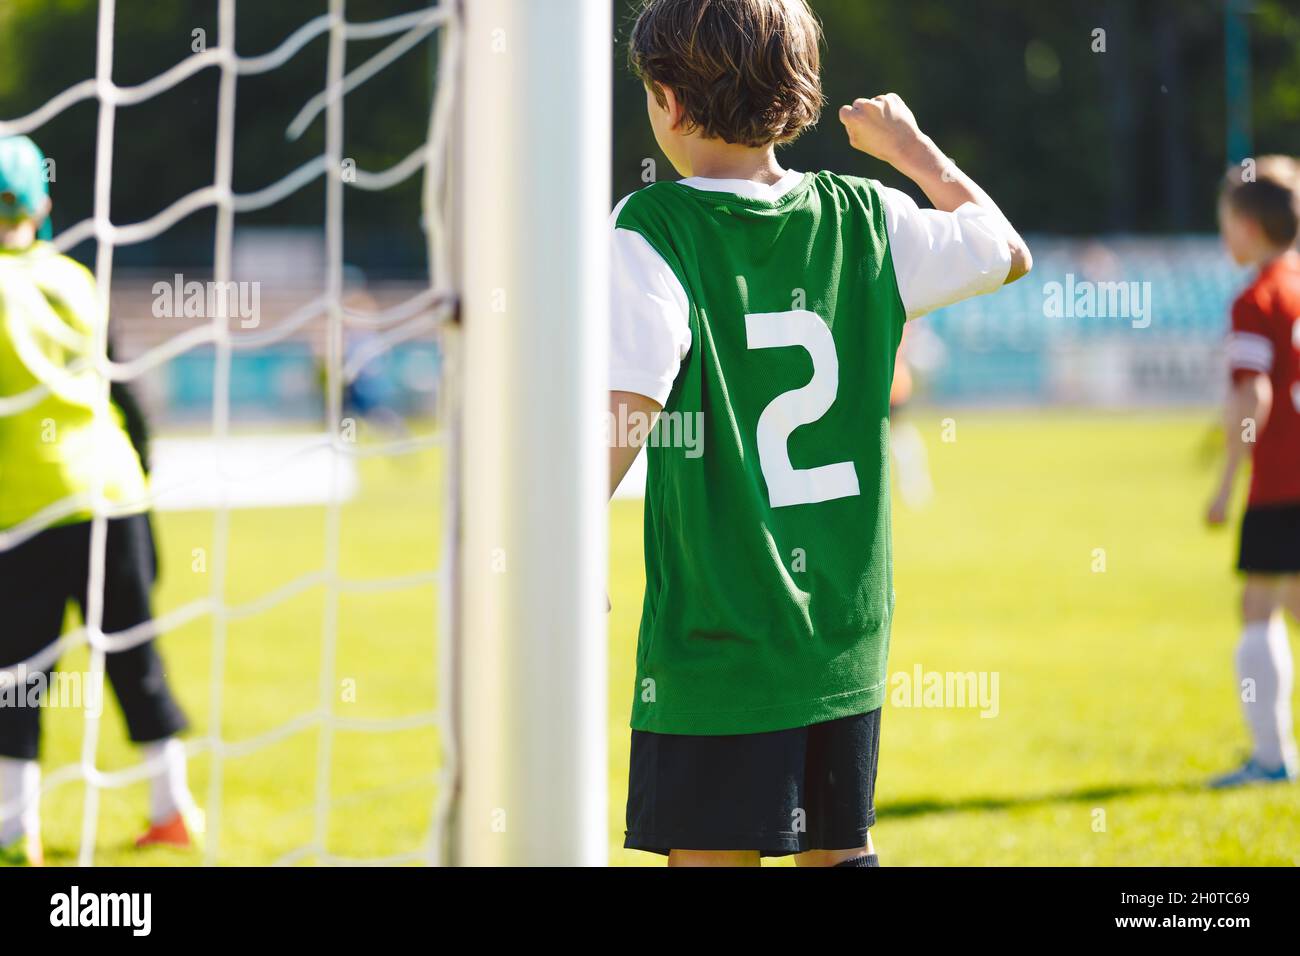 Happy boy standing in football goal during corner kick. School kids playing football game on grass pitch Stock Photo